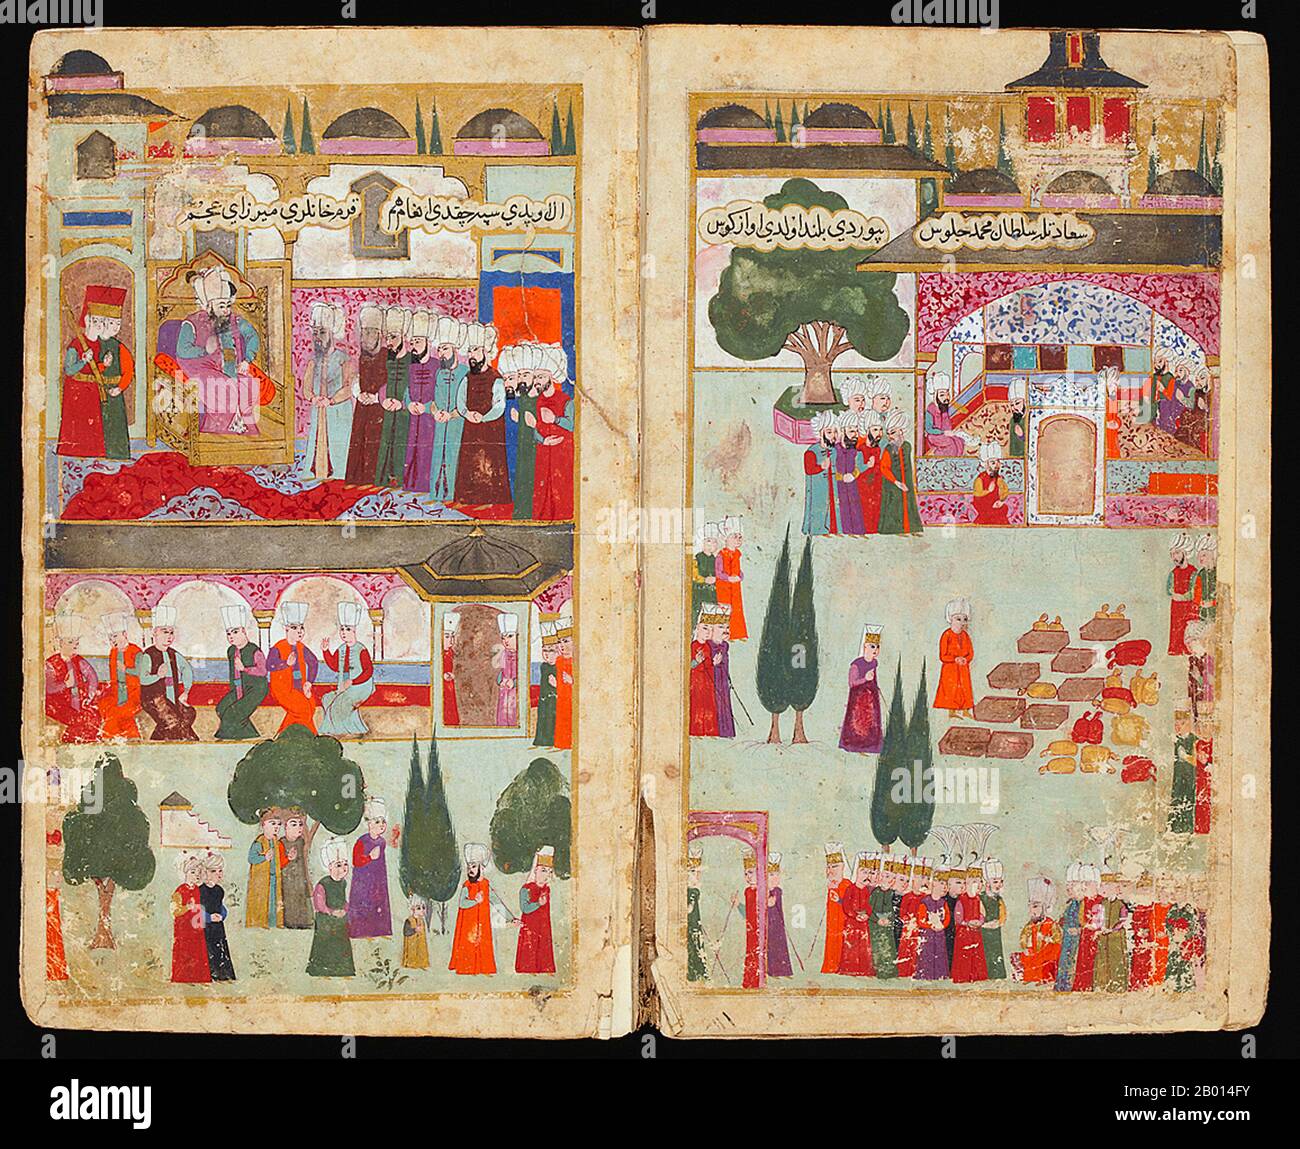 Turkey: 'Mehmed III's enthronement in the Davudpasha Pavilion'. Miniature paintings from an illustrated manuscript depicting the 1595 military campaign in Hungary by Ottoman Sultan Mehmed III, c. 1600.  Mehmed III Adli (May 26, 1566 – December 21/22, 1603) was sultan of the Ottoman Empire from 1595-1603. He remains notorious for having nineteen of his brothers and half brothers murdered to secure power. He also killed over twenty of his sisters. They were all strangled by deaf-mutes. Mehmed III was an idle ruler, leaving government to his mother Safiye. Stock Photo